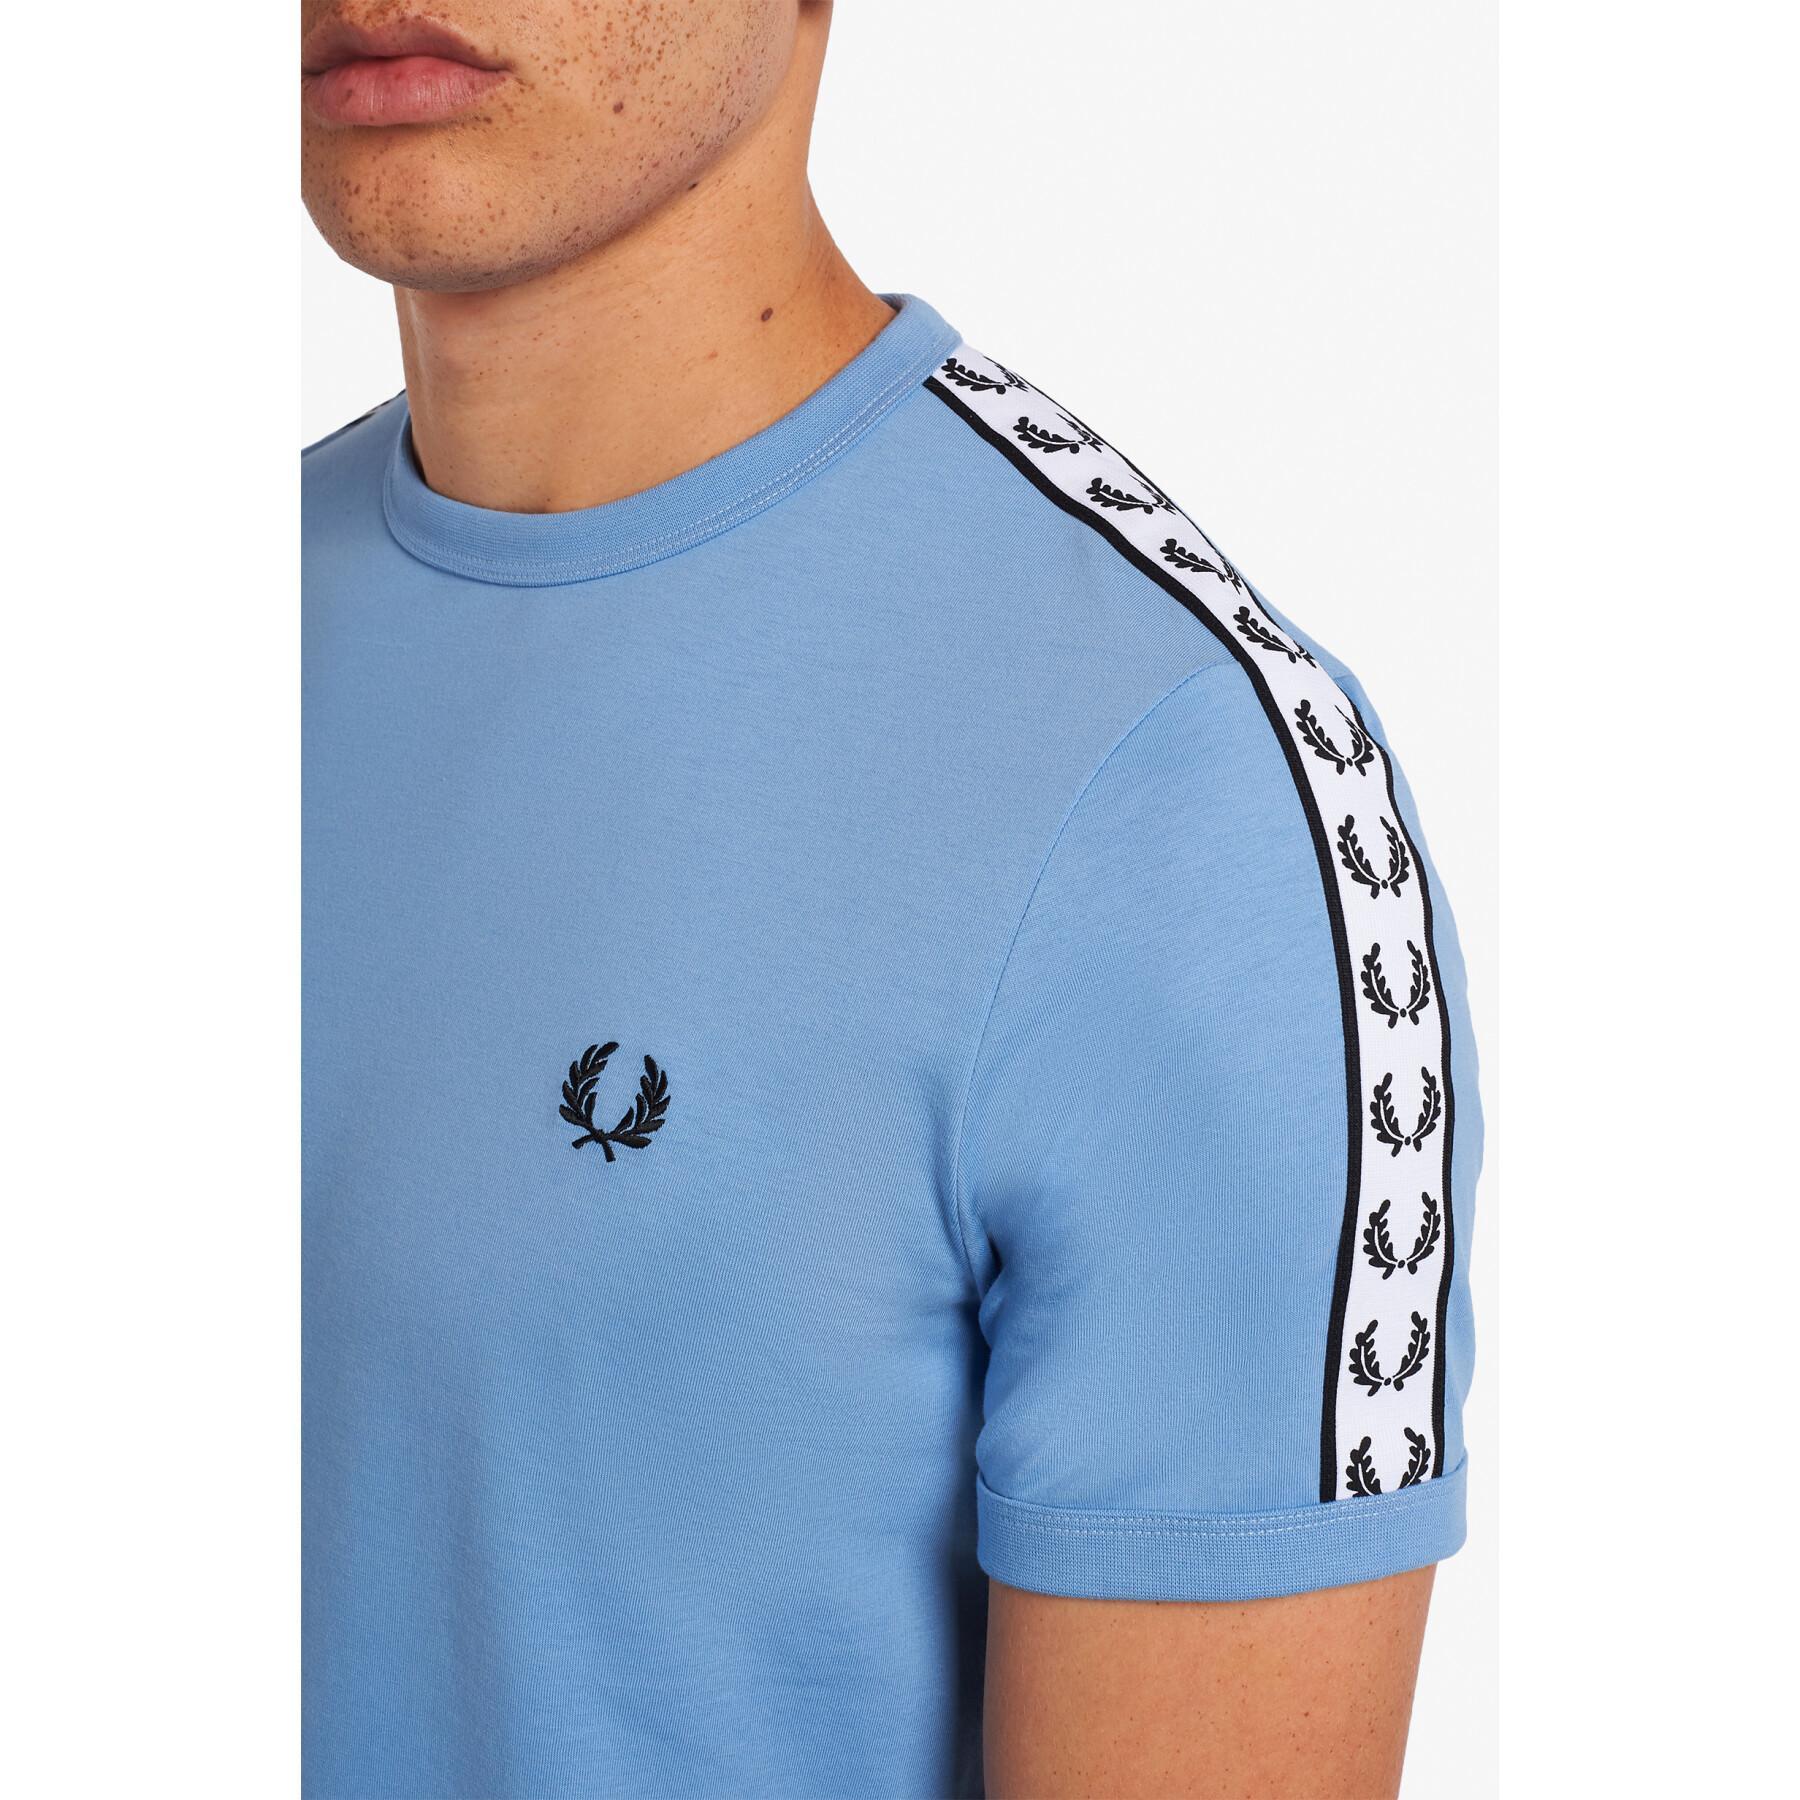 Maglietta Fred Perry Taped Ringer